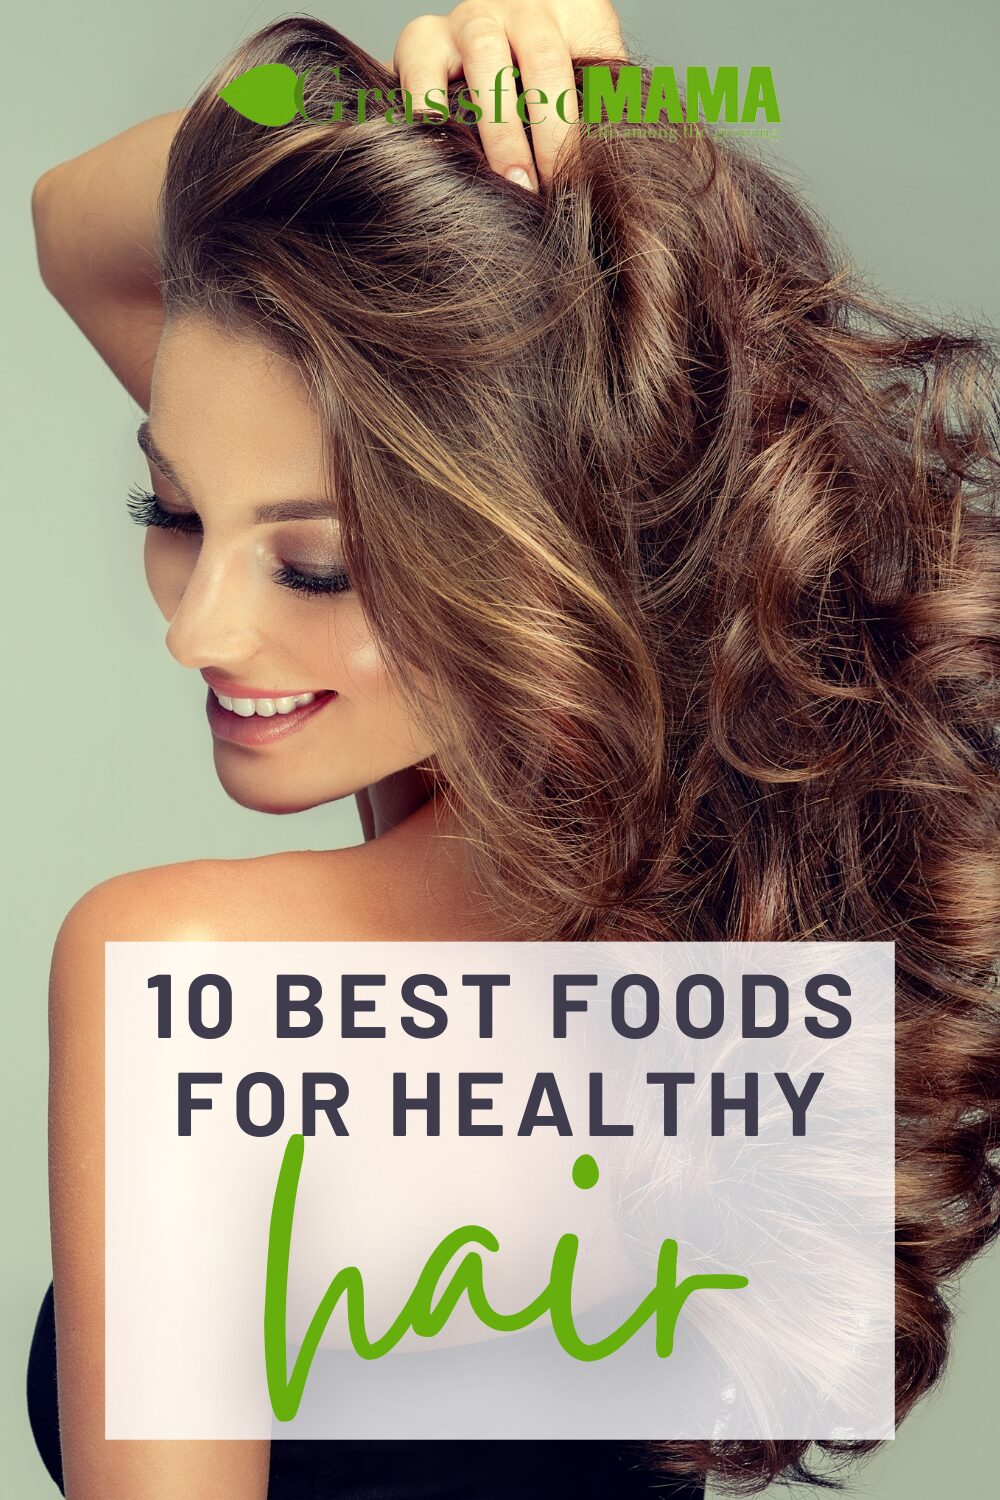 10 best foods for healthy hair